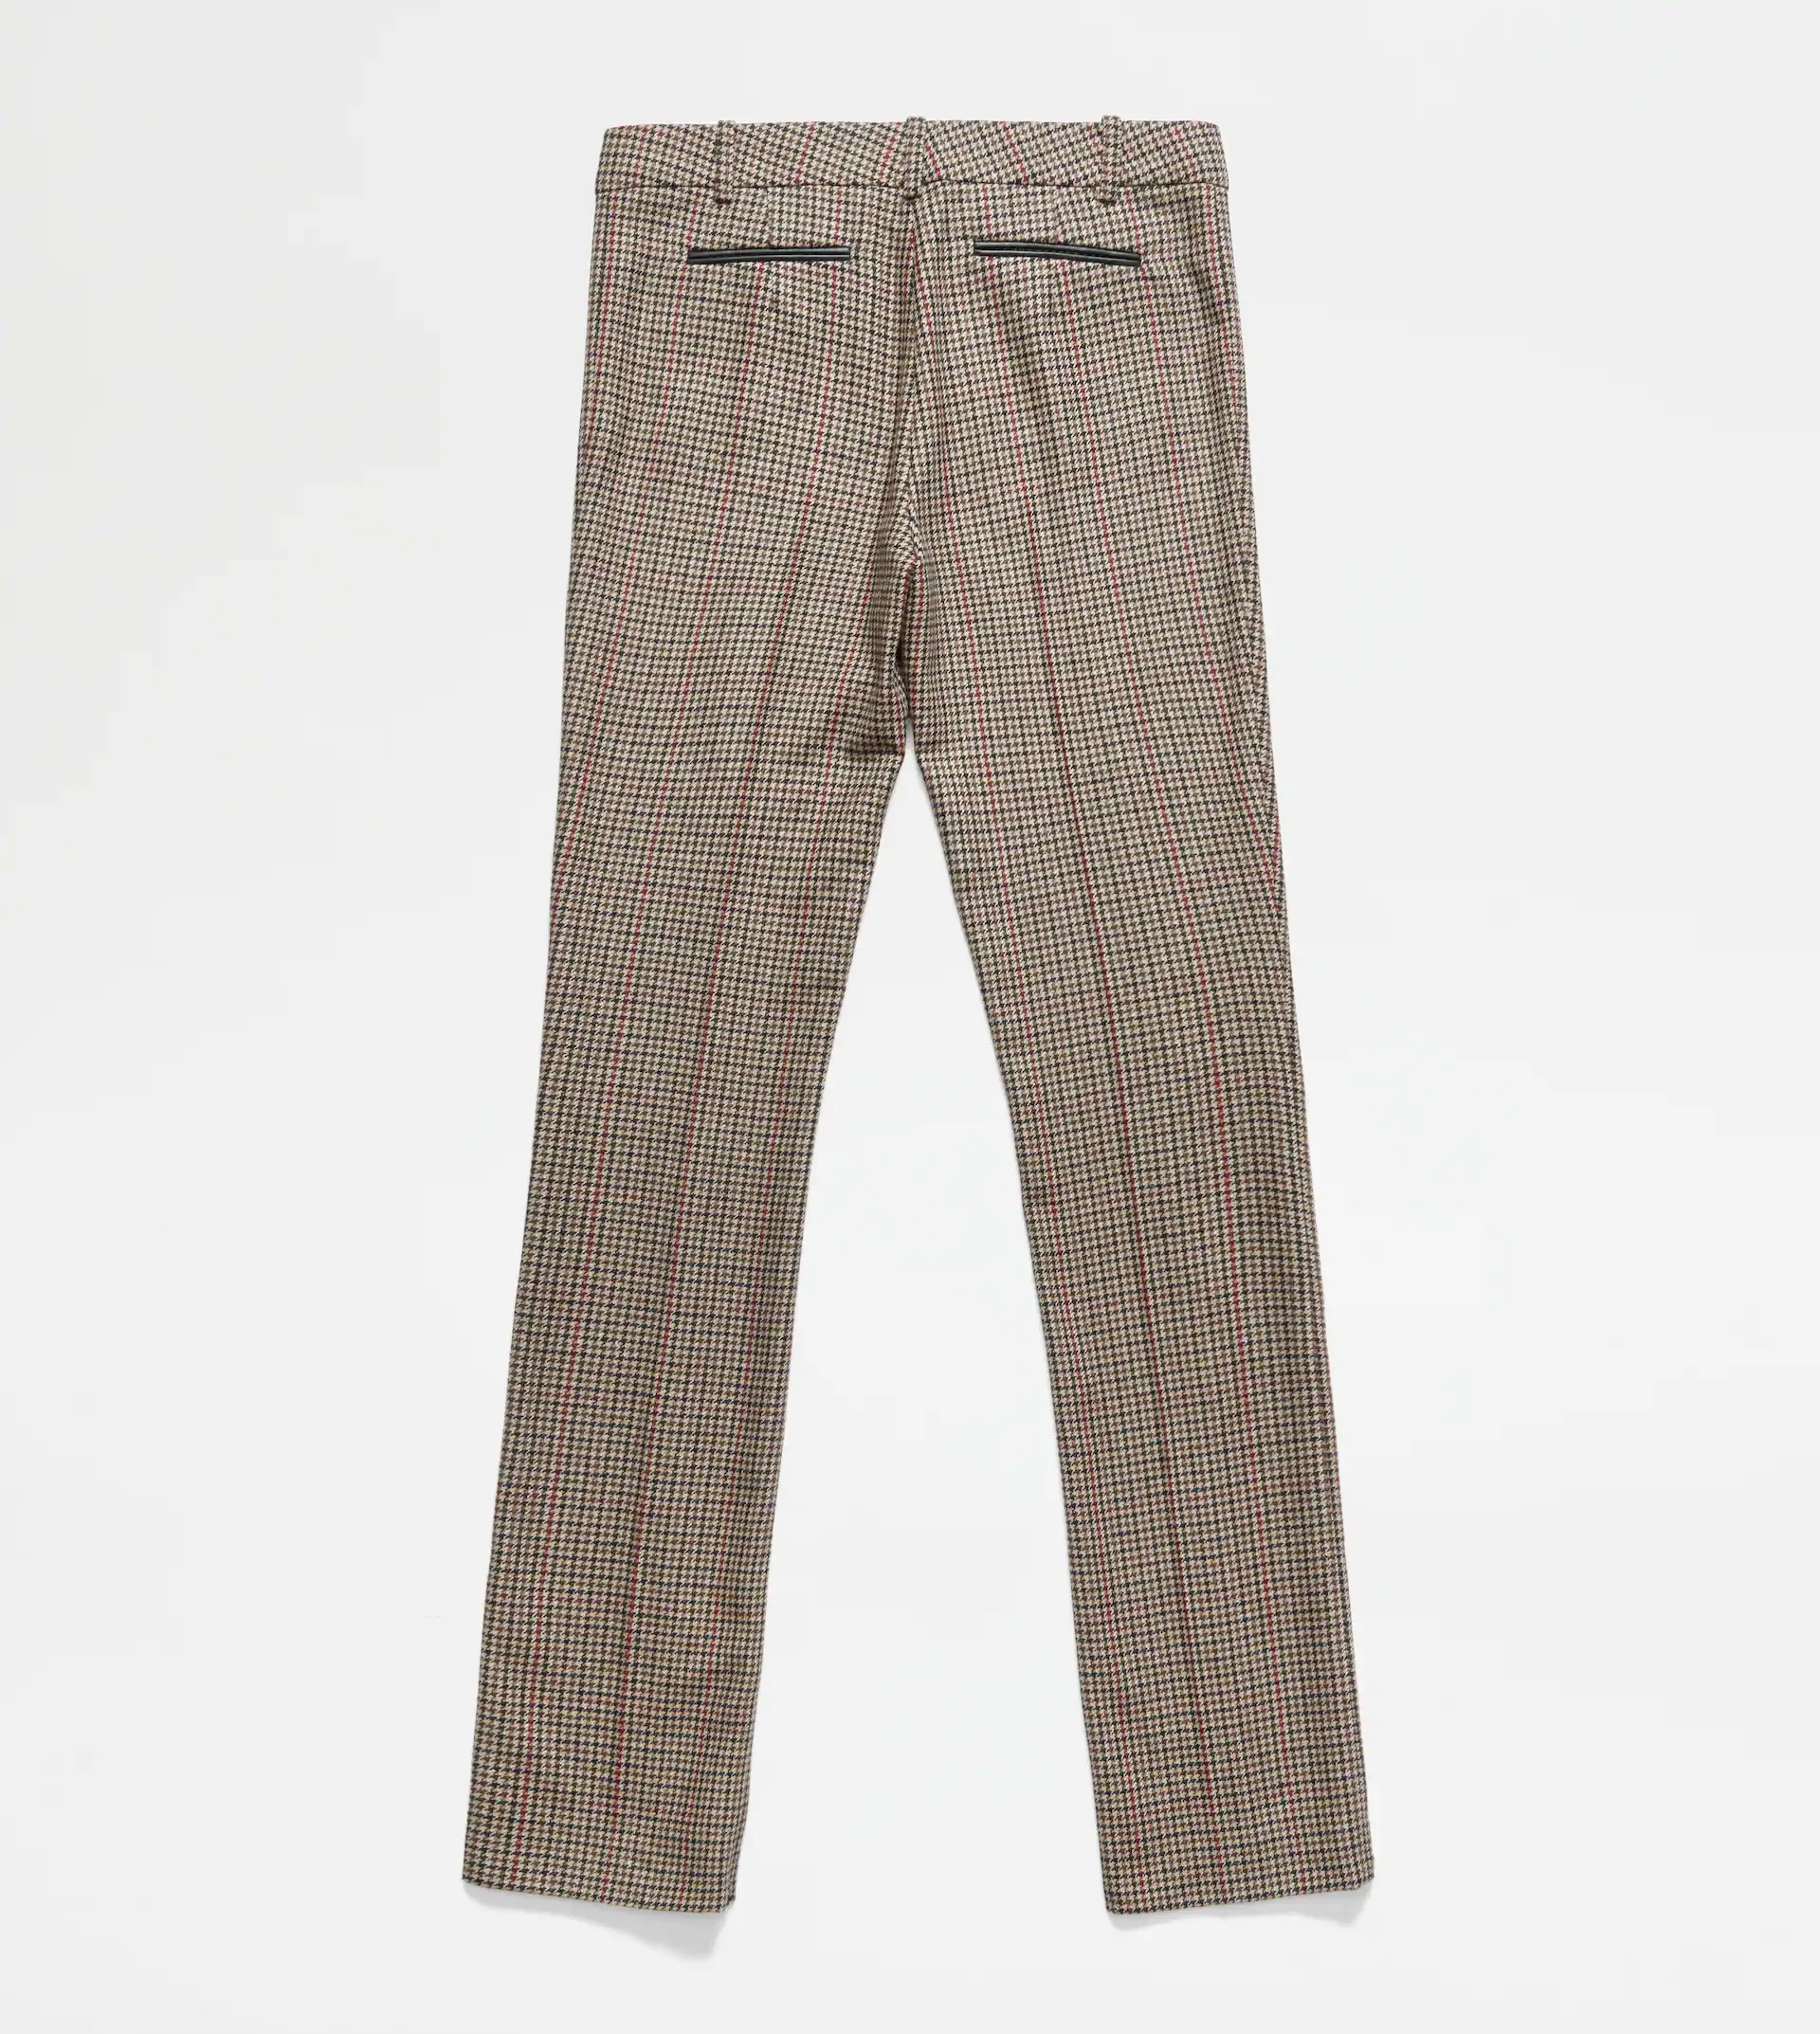 MIXED WOOL TROUSERS - RED, BLUE, BROWN - 7